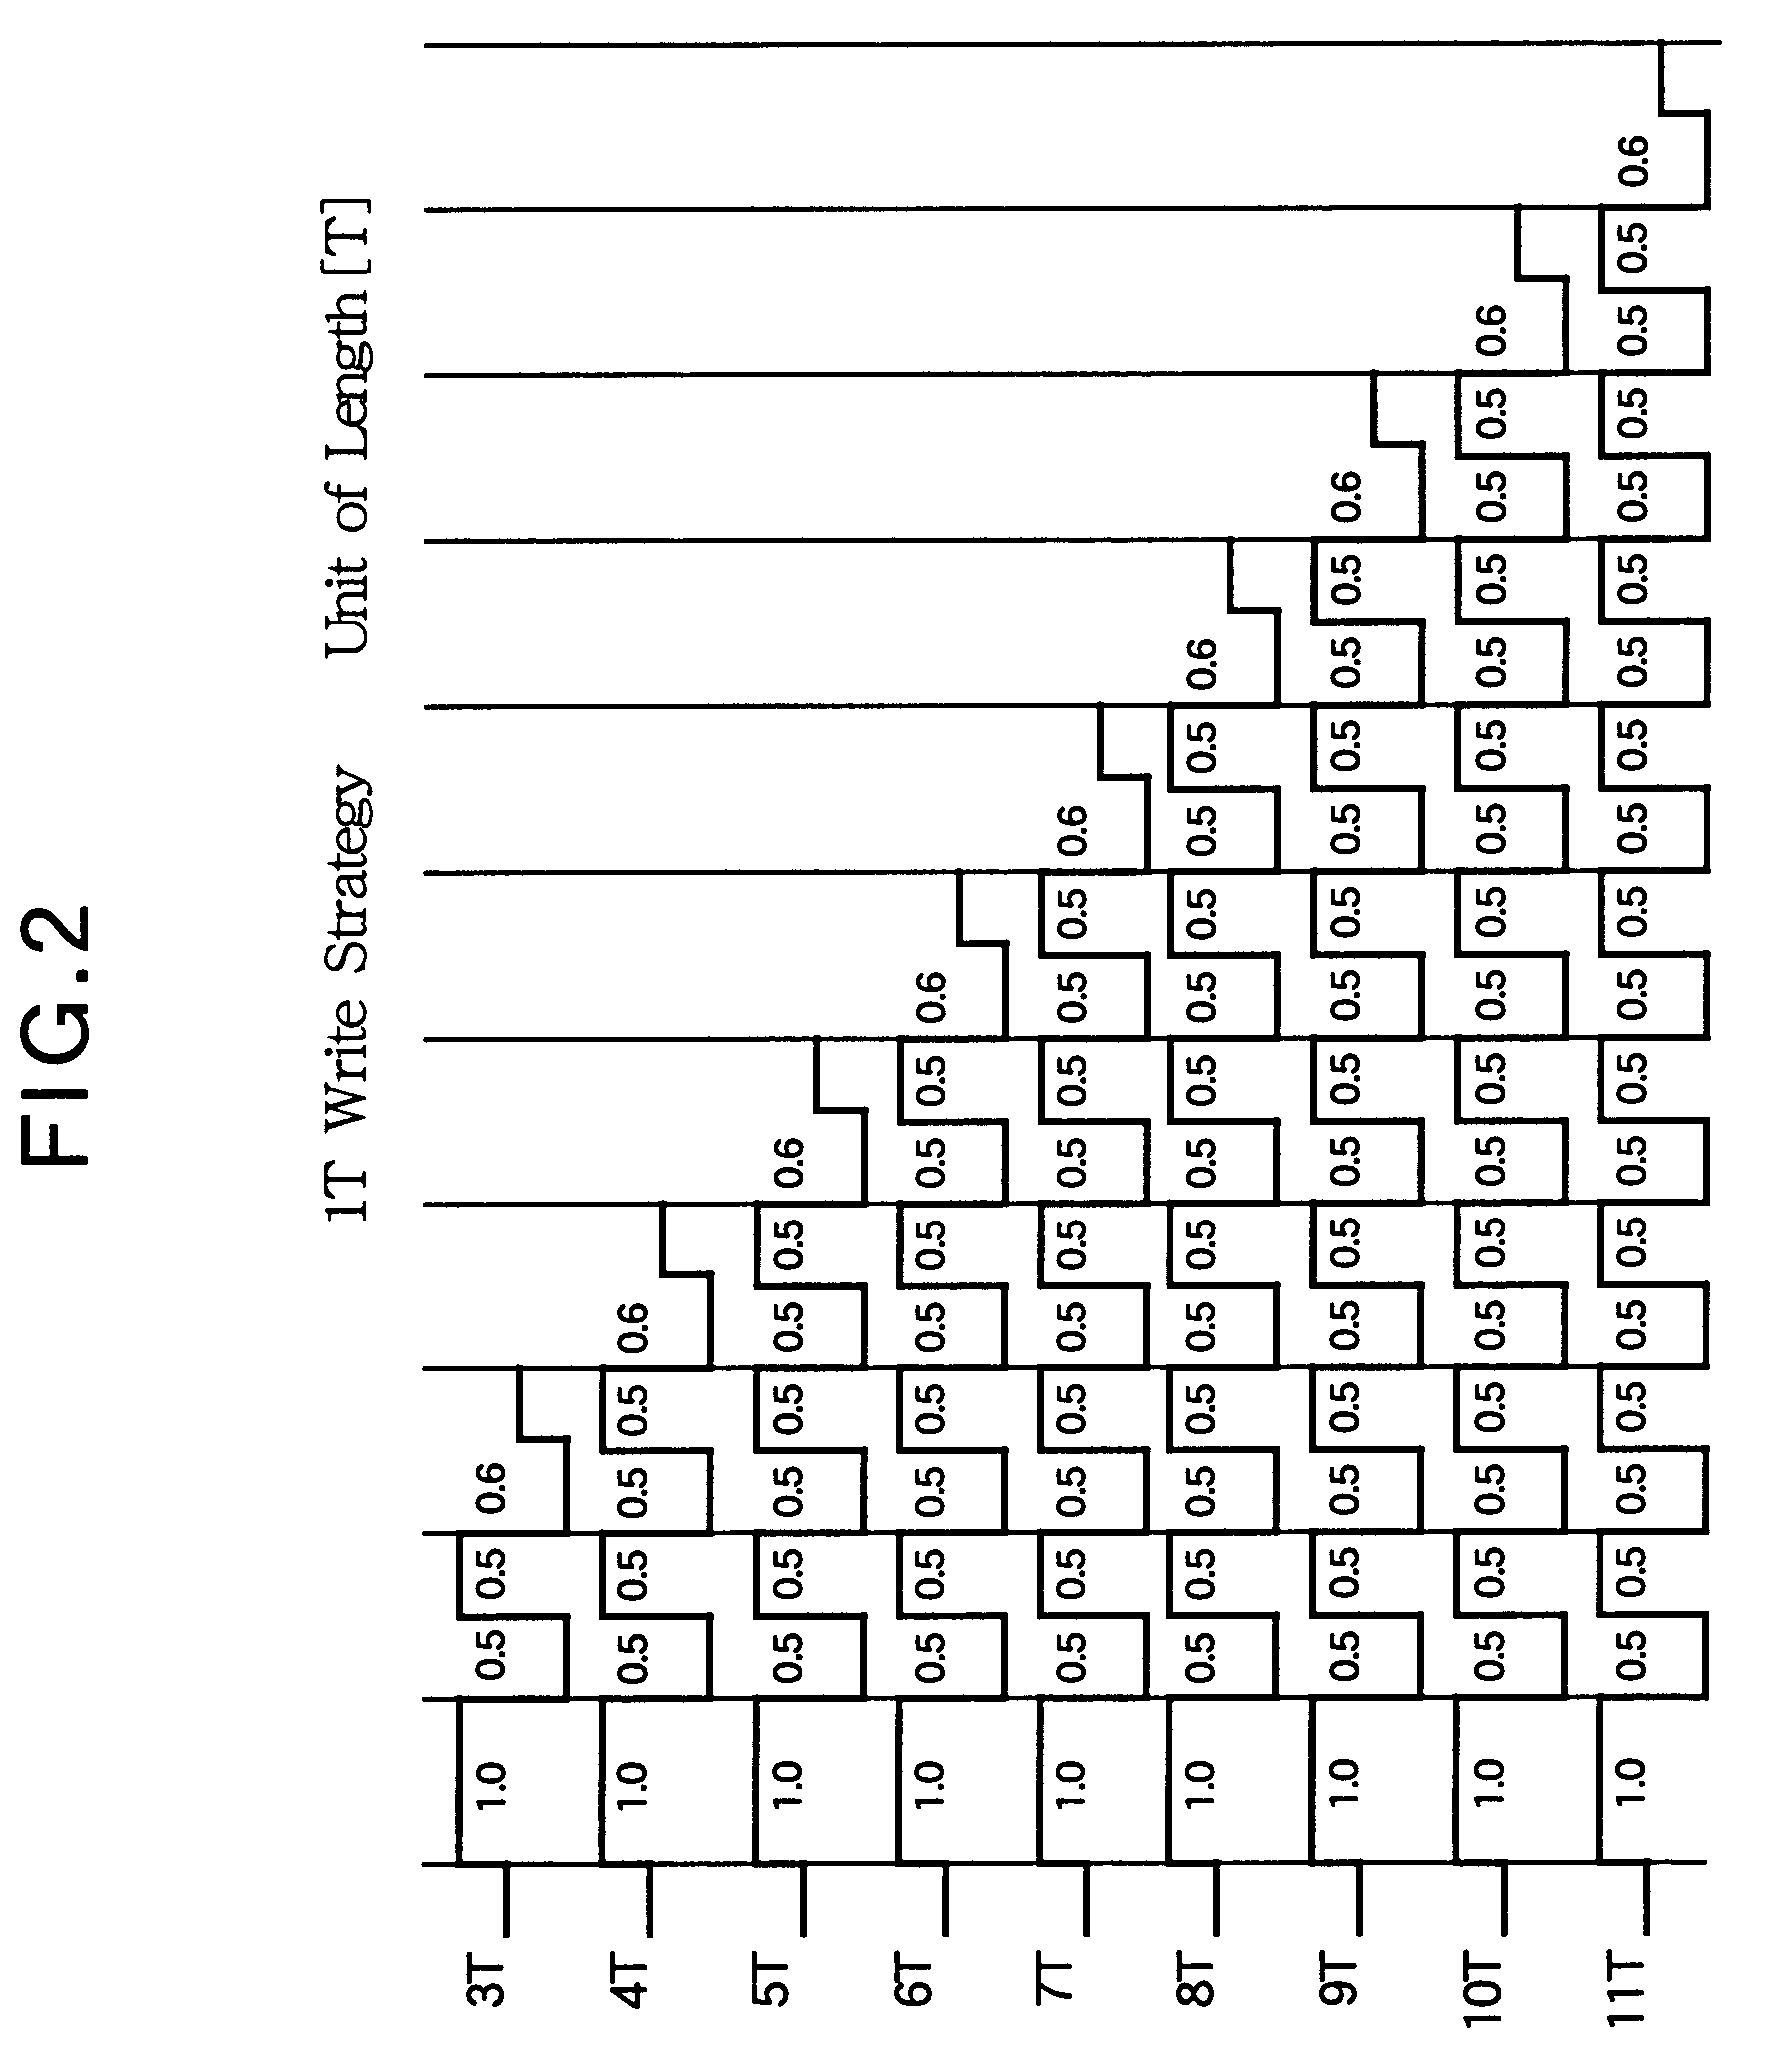 Optical disk recording apparatus controllable by table of multi-pulse patterns